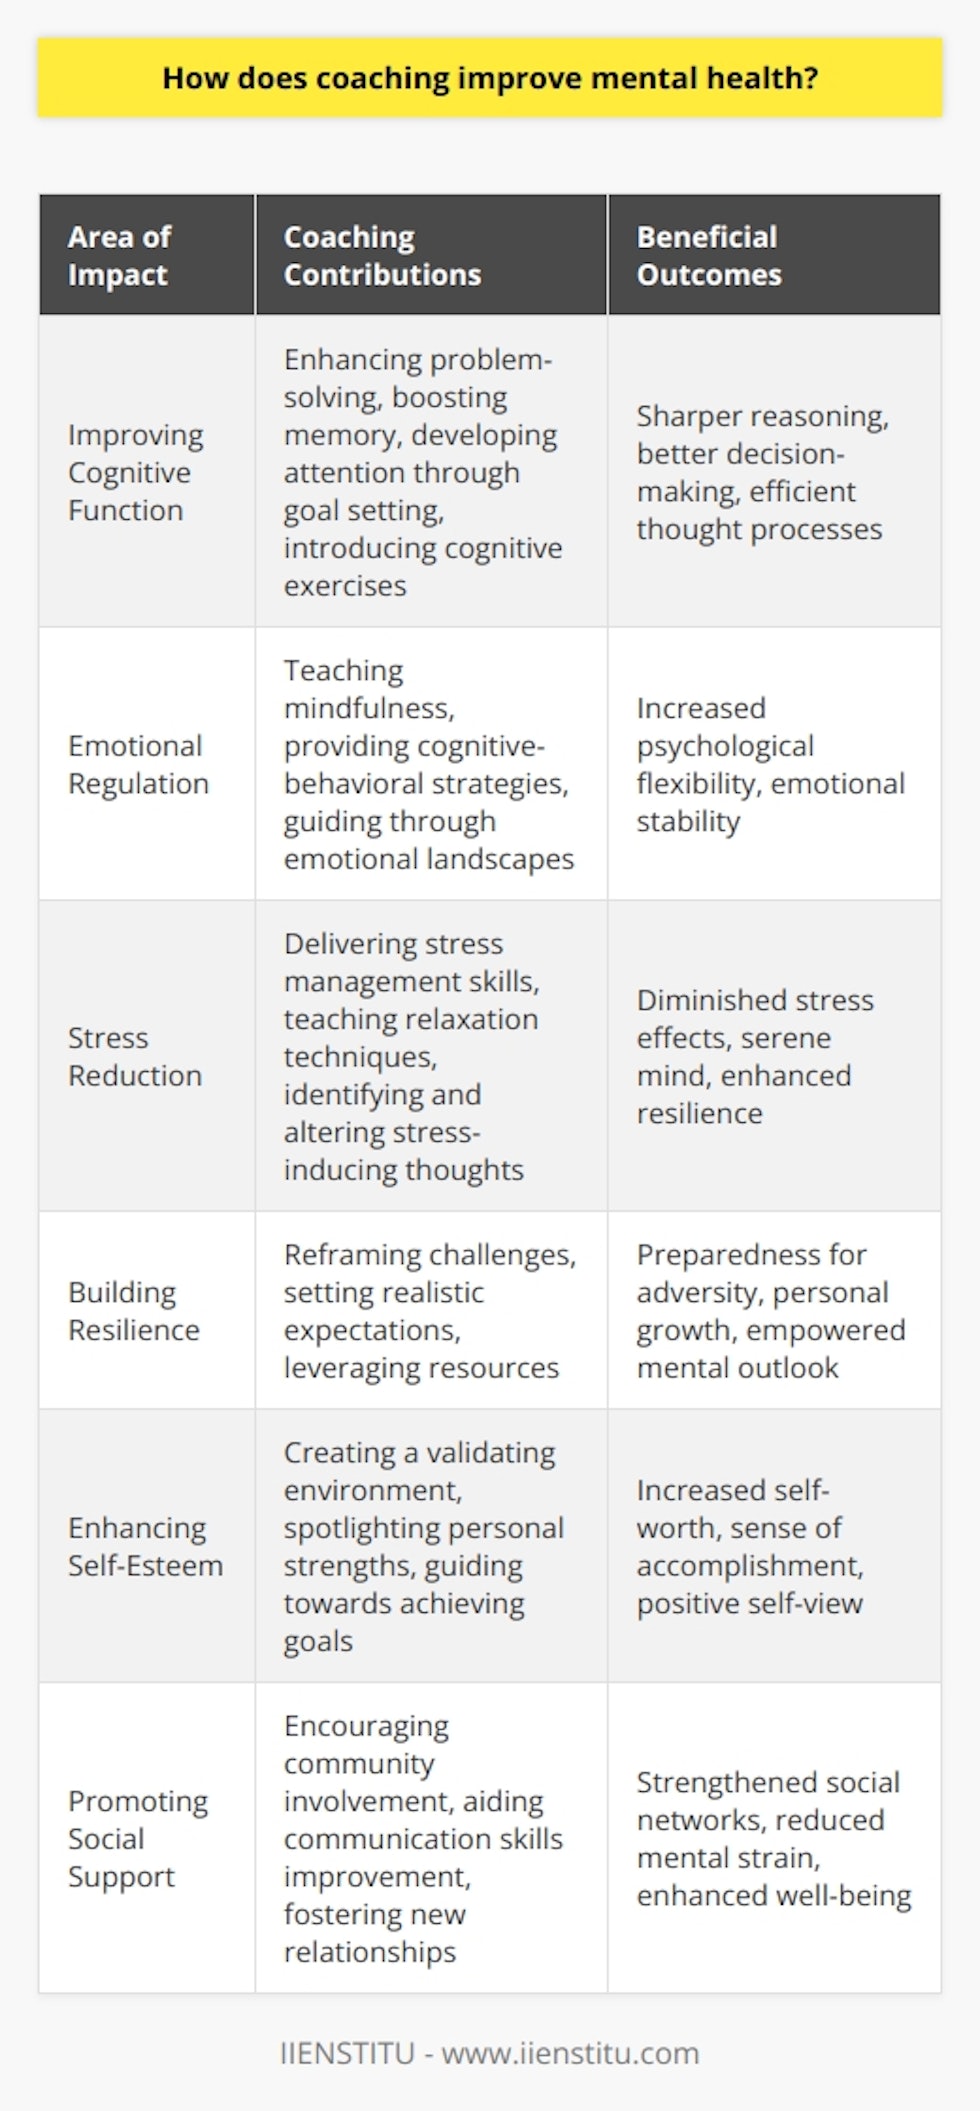 Coaching has emerged as a potent tool for bolstering mental health, which is increasingly important in our fast-paced, often stressful modern world. Here, we explore how coaching contributes to this critical aspect of well-being by focusing on key areas such as cognitive function, emotional regulation, stress reduction, resilience, self-esteem, and social support.**Improving Cognitive Function**A pivotal benefit of coaching is its positive impact on cognitive function. Engaging with a coach can stimulate mental acuity by challenging individuals to develop new problem-solving skills, enhance memory through repeated practice, and improve attention by setting focused goals. Coaches can introduce exercises that are designed to sharpen reasoning abilities and increase mental agility, leading to better decision-making and more efficient thought processes.**Emotional Regulation**Mastering emotional regulation is fundamental to mental health. A coach acts as a guide, providing strategies to help individuals navigate complex emotional landscapes. This guidance may involve mindfulness techniques, cognitive-behavioral strategies, or other methods tailored to individual needs. By learning to identify, understand, and respond to emotions in a healthy way, people can enjoy increased psychological flexibility and stability.**Stress Reduction**Stress is a major adversary of mental health, yet it's an unavoidable aspect of life. Coaching intervenes by delivering personalized strategies aimed at stress management. This includes time management skills, relaxation techniques, and identifying thought patterns that exacerbate stress. As individuals adopt these coping mechanisms, the pervasive impact of stress diminishes, leading to a more serene and resilient mind.**Building Resilience**Resilience is our psychological armor against adversity. Coaching is instrumental in the development of this resilience. Through a coaching relationship, individuals can learn to reframe challenges, set realistic expectations, and draw upon internal and external resources. This process not only prepares a person for future challenges but also fosters growth and a sense of empowerment that directly bolsters mental health.**Enhancing Self-Esteem**Our self-view deeply influences our mental health, and coaching offers a route to improve self-esteem. Coaches provide an encouraging space where individuals can discover their strengths and acknowledge their achievements, no matter how small. Additionally, by setting and attaining personal goals under the guidance of a coach, individuals feel a sense of accomplishment that supports a healthy level of self-esteem.**Promoting Social Support**Humans are inherently social beings, and the quality of our social connections can greatly affect our mental health. Coaches understand the importance of a support network and often work with their clients to build and strengthen their social ties. Whether it's by encouraging involvement in community activities, aiding in the improvement of communication skills, or exploring avenues for establishing new relationships, coaches help cultivate a supportive environment that serves as a buffer against mental strain.In the context of these diverse but interconnected areas, coaching proves to be a multifaceted approach to improving mental health. By working on cognitive function, emotional well-being, stress management, resilience, self-worth, and social connectivity, coaches from institutions like IIENSTITU touch upon the core elements that make up our mental health fabric. They don't just offer temporary fixes but foster enduring skills and perspectives that continue to serve individuals long after the coaching sessions have concluded.